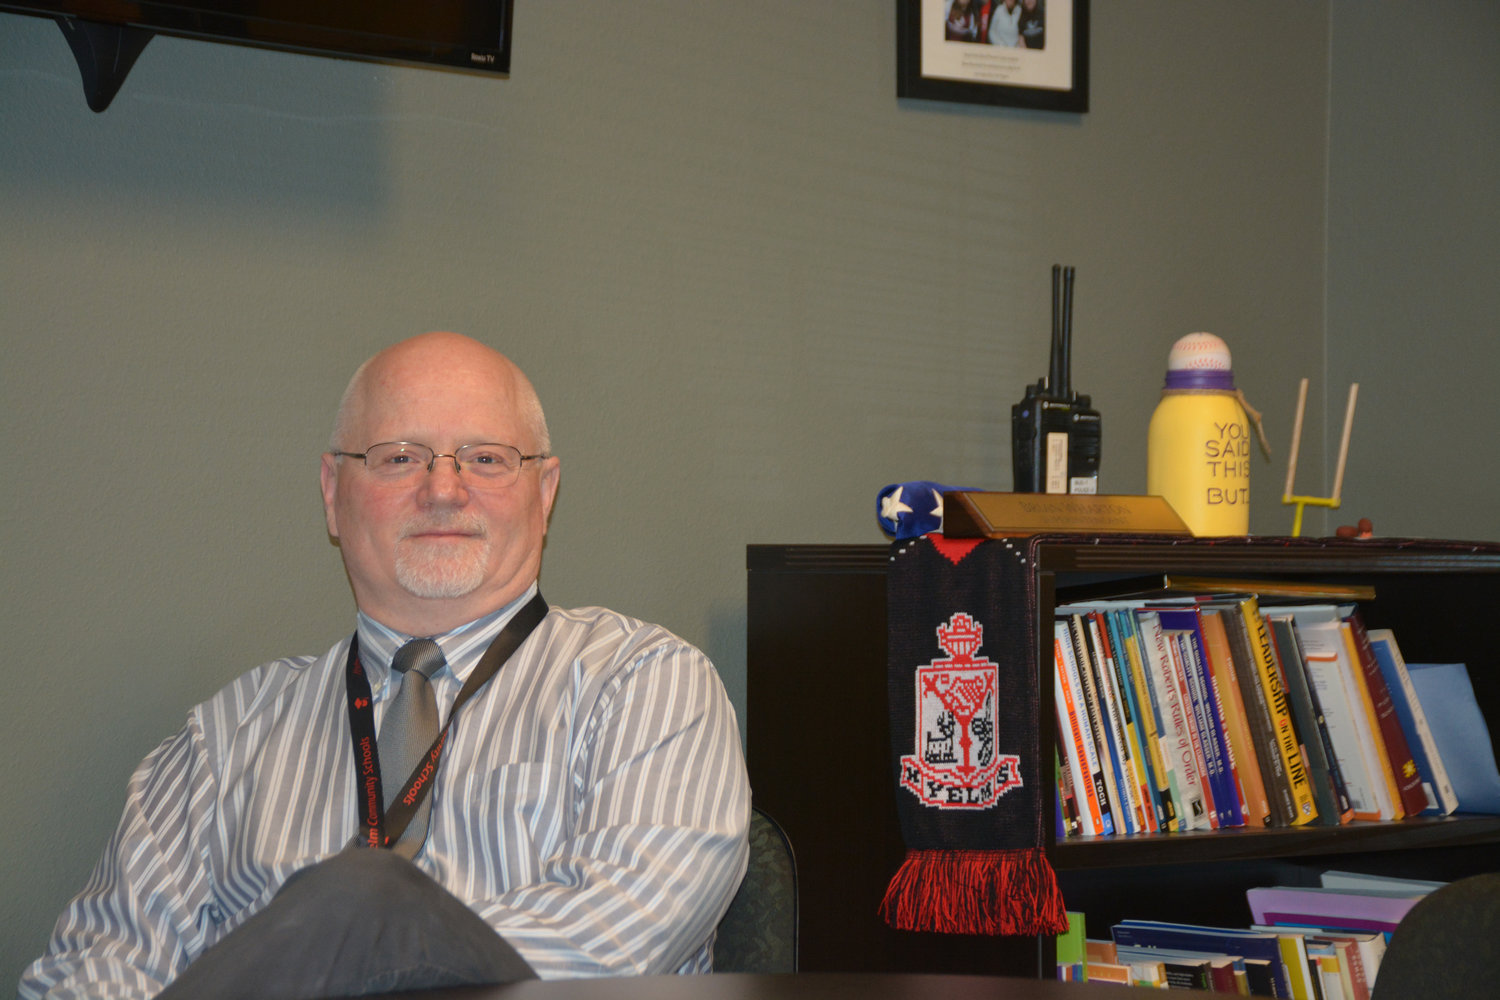 Brian Wharton is pictured in his office at the Yelm School District office.